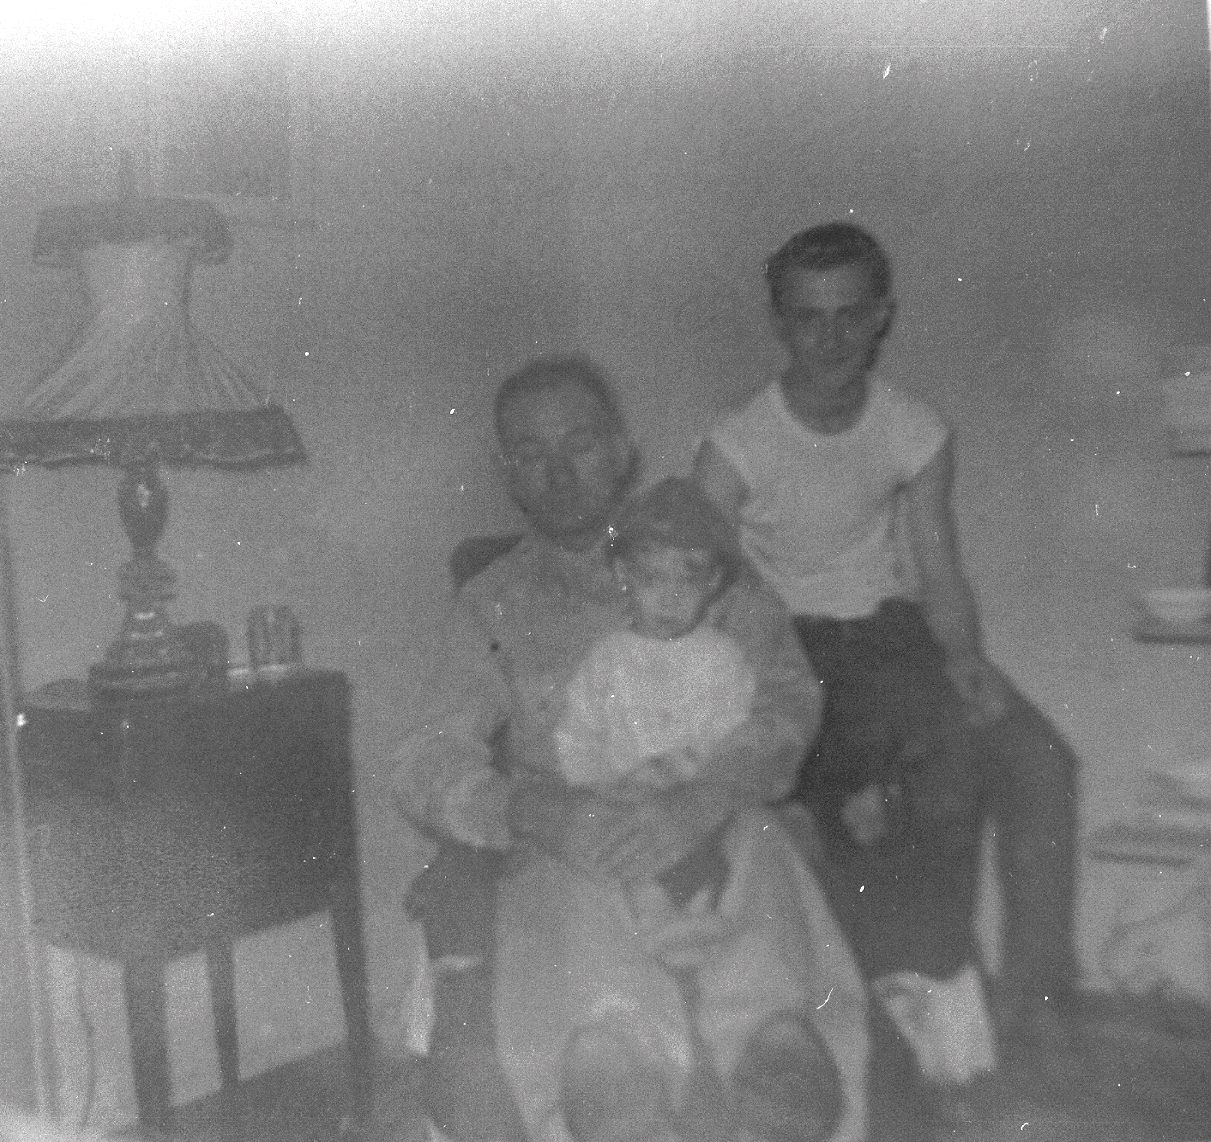 Uncle Joe, My older Brother Jimmy and a little boy, Me the Webmaster